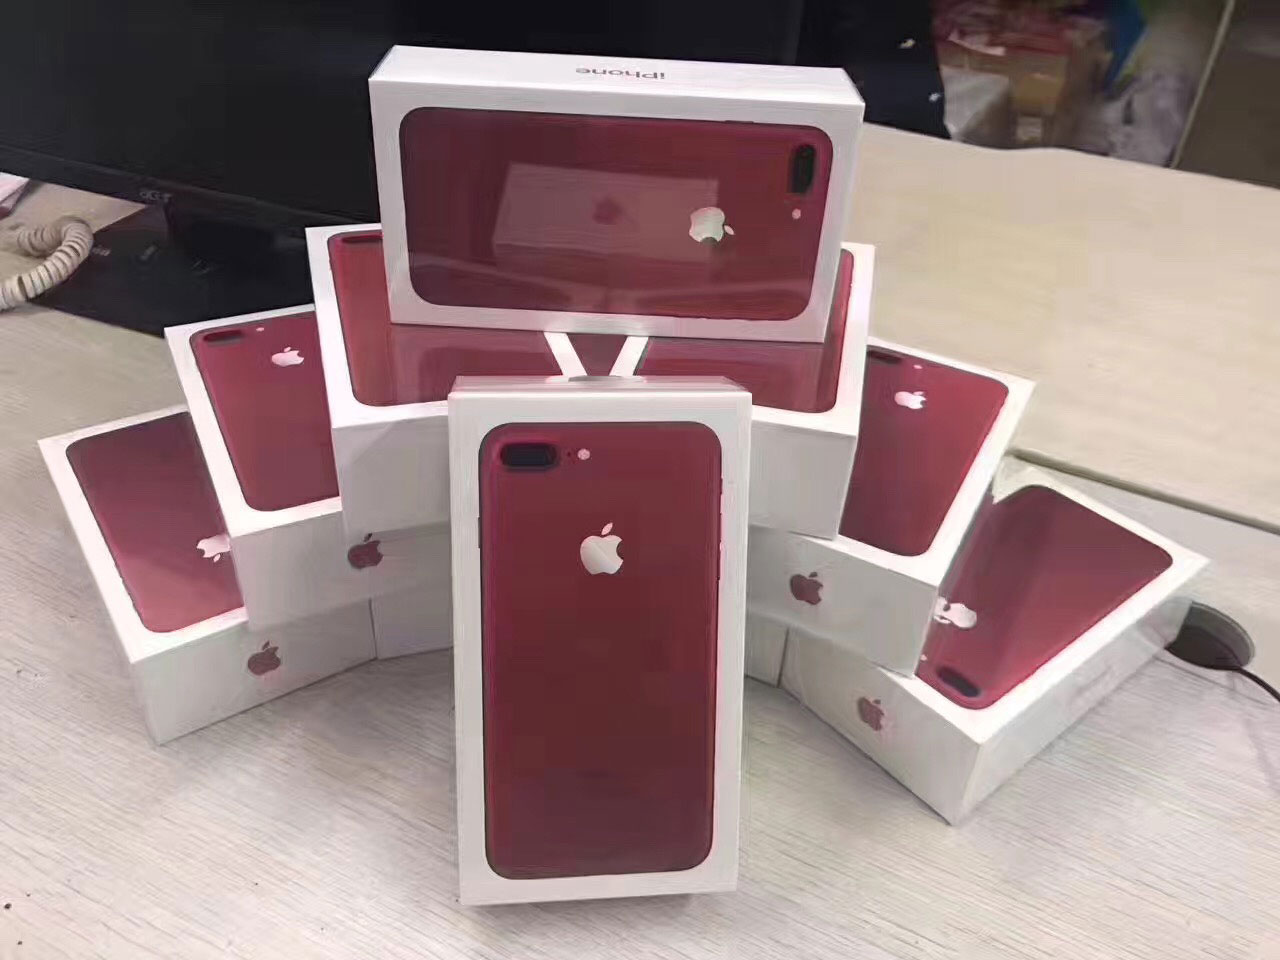 iPhone 7 (PRODUCT)RED saliendo de China